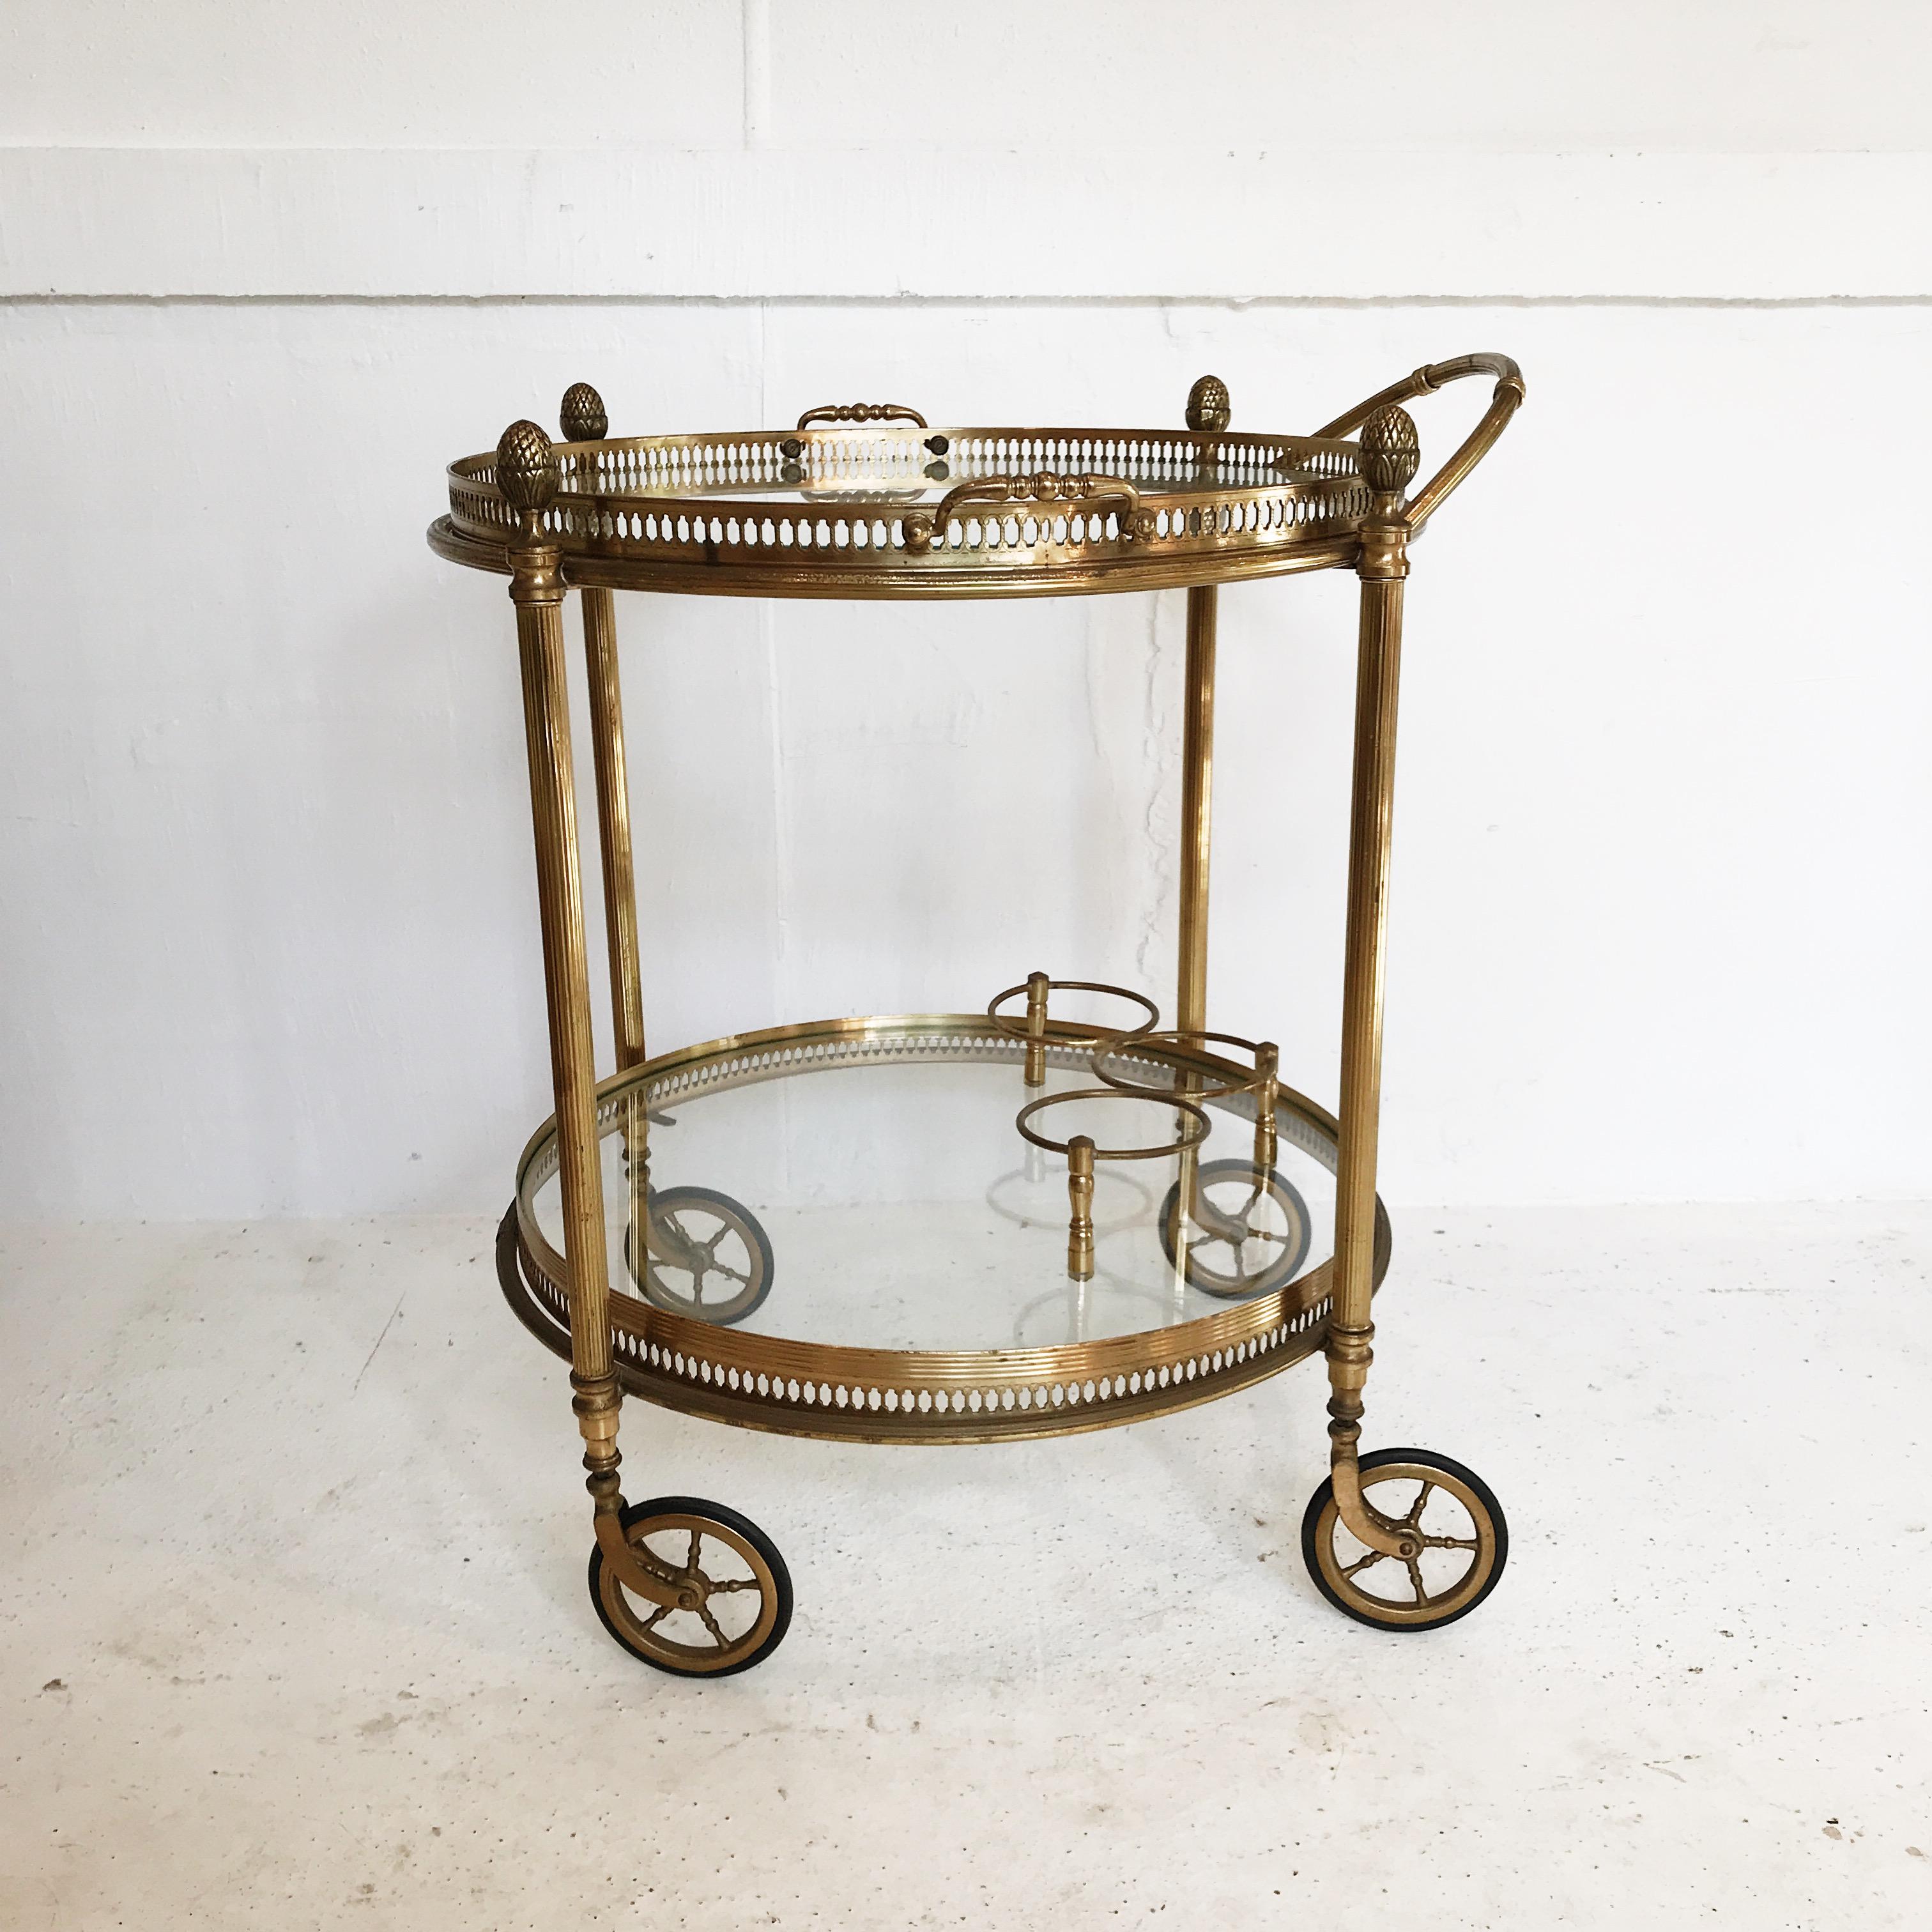 An enchanting 1940s vintage, Maison  Baguès, two-tier drinks cart/serving trolley in gilt brass. Features two round glass tiers, each with pierced galleries, and is adorned with acorn finials. Bottom tier includes attached 